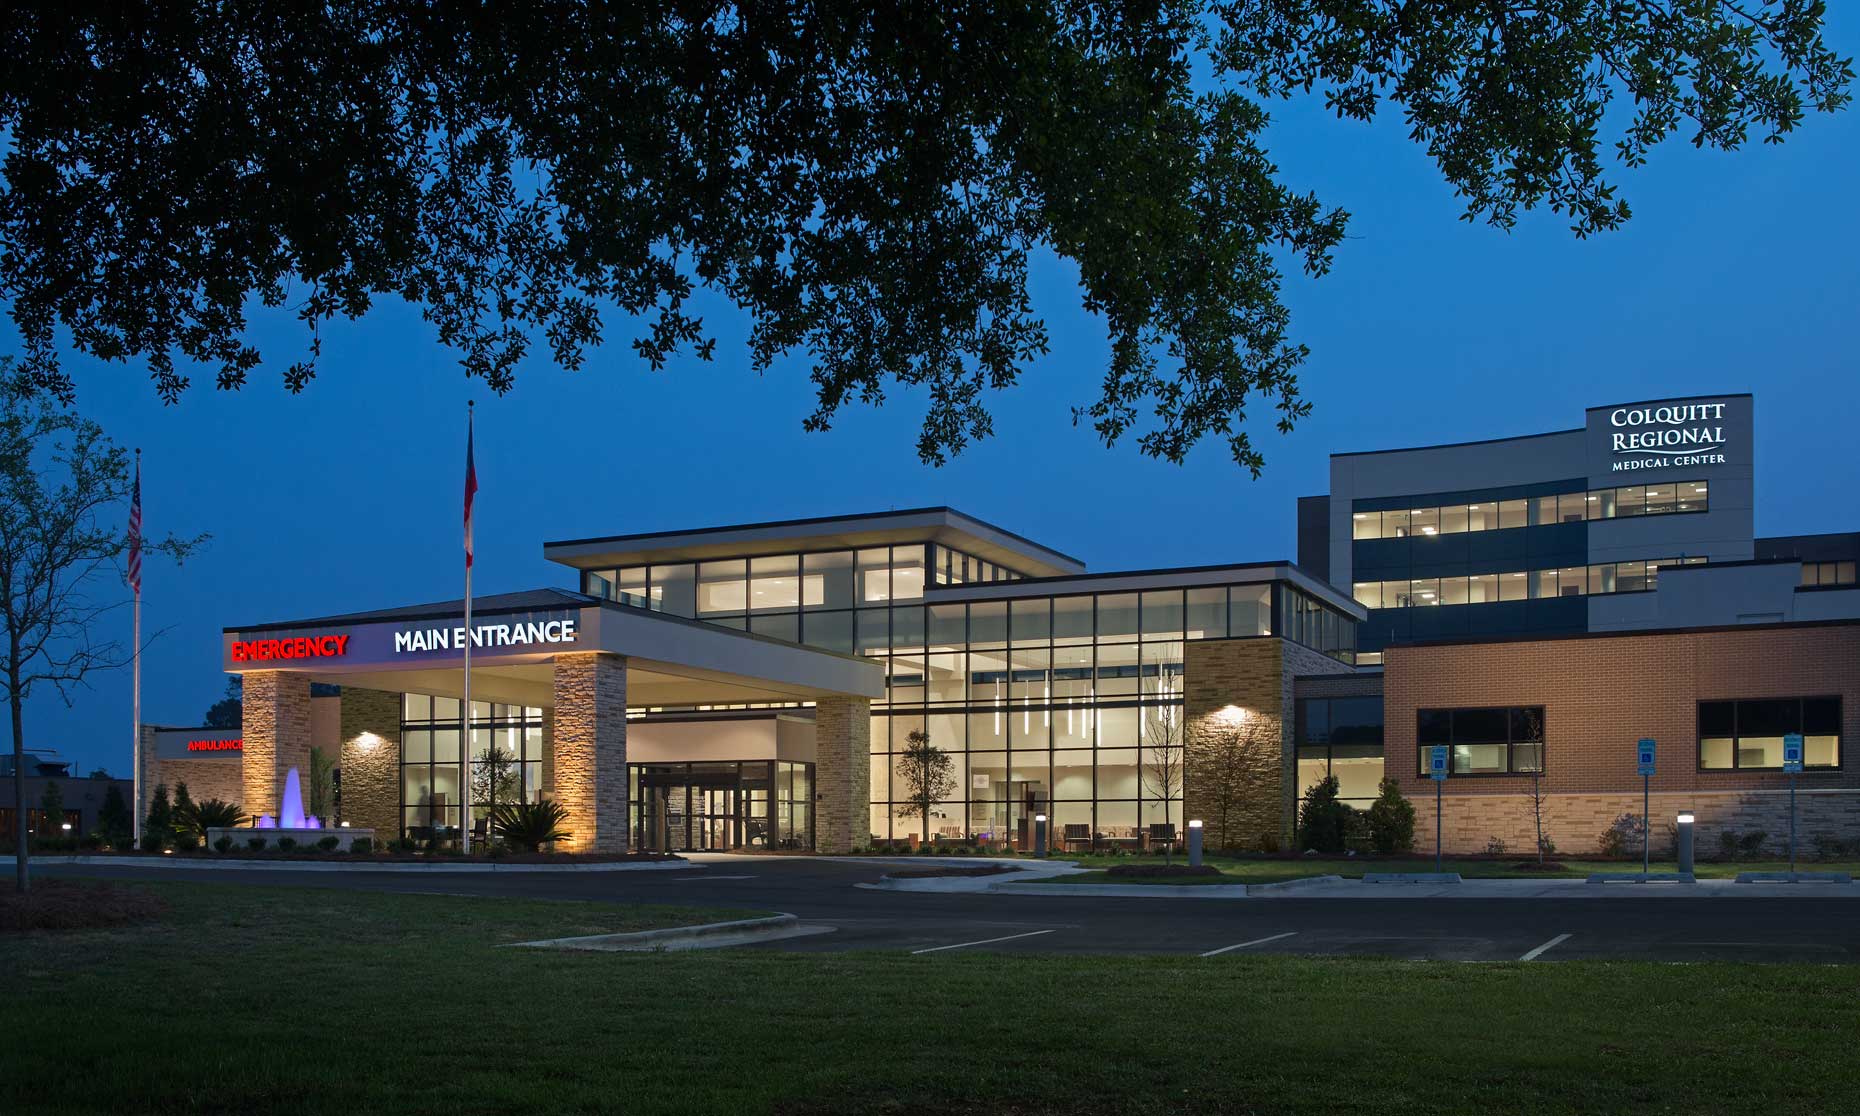 This twilight photograph of Colquitt Regional Medical Center shows interesting transparency to the inside